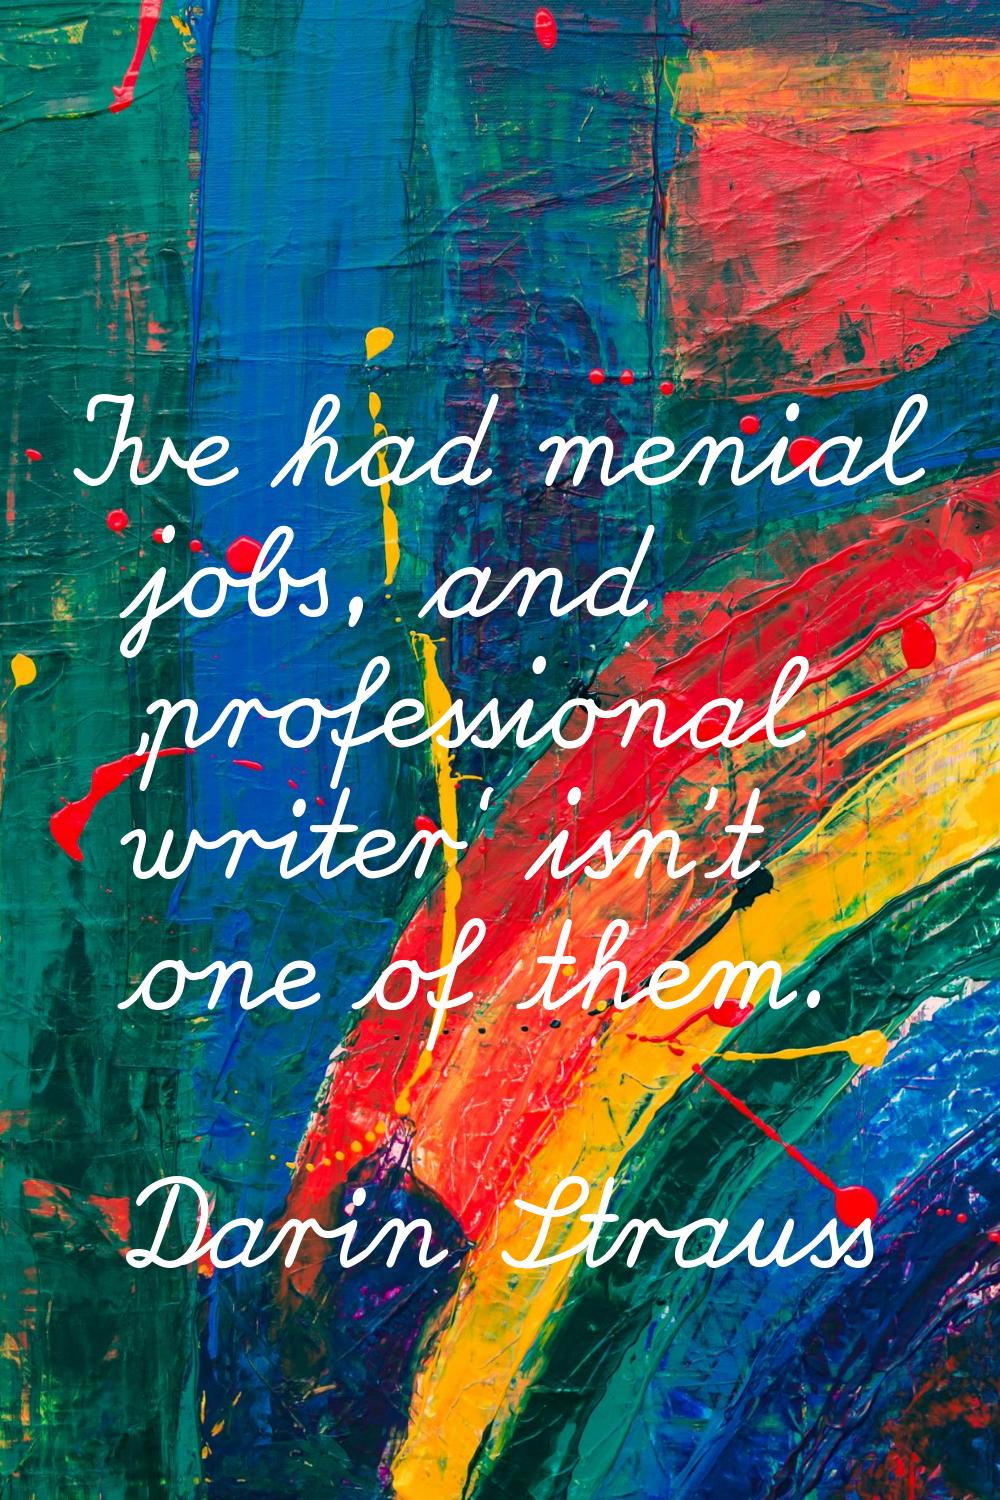 I've had menial jobs, and 'professional writer' isn't one of them.